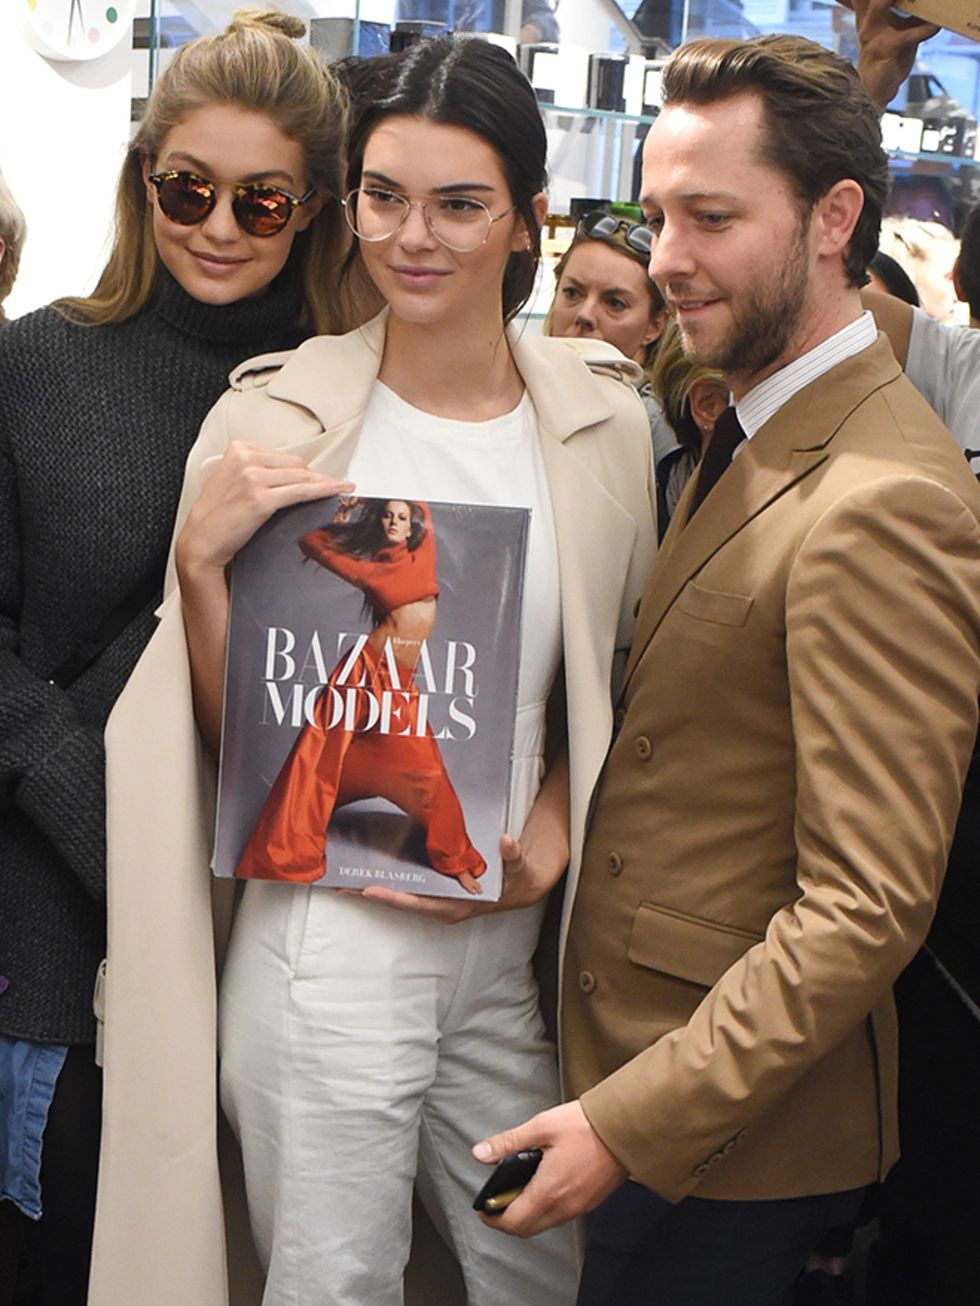 Gigi Hadid, Kendall Jenner and Derek Blasberg attend an event at the Colette store, Paris.